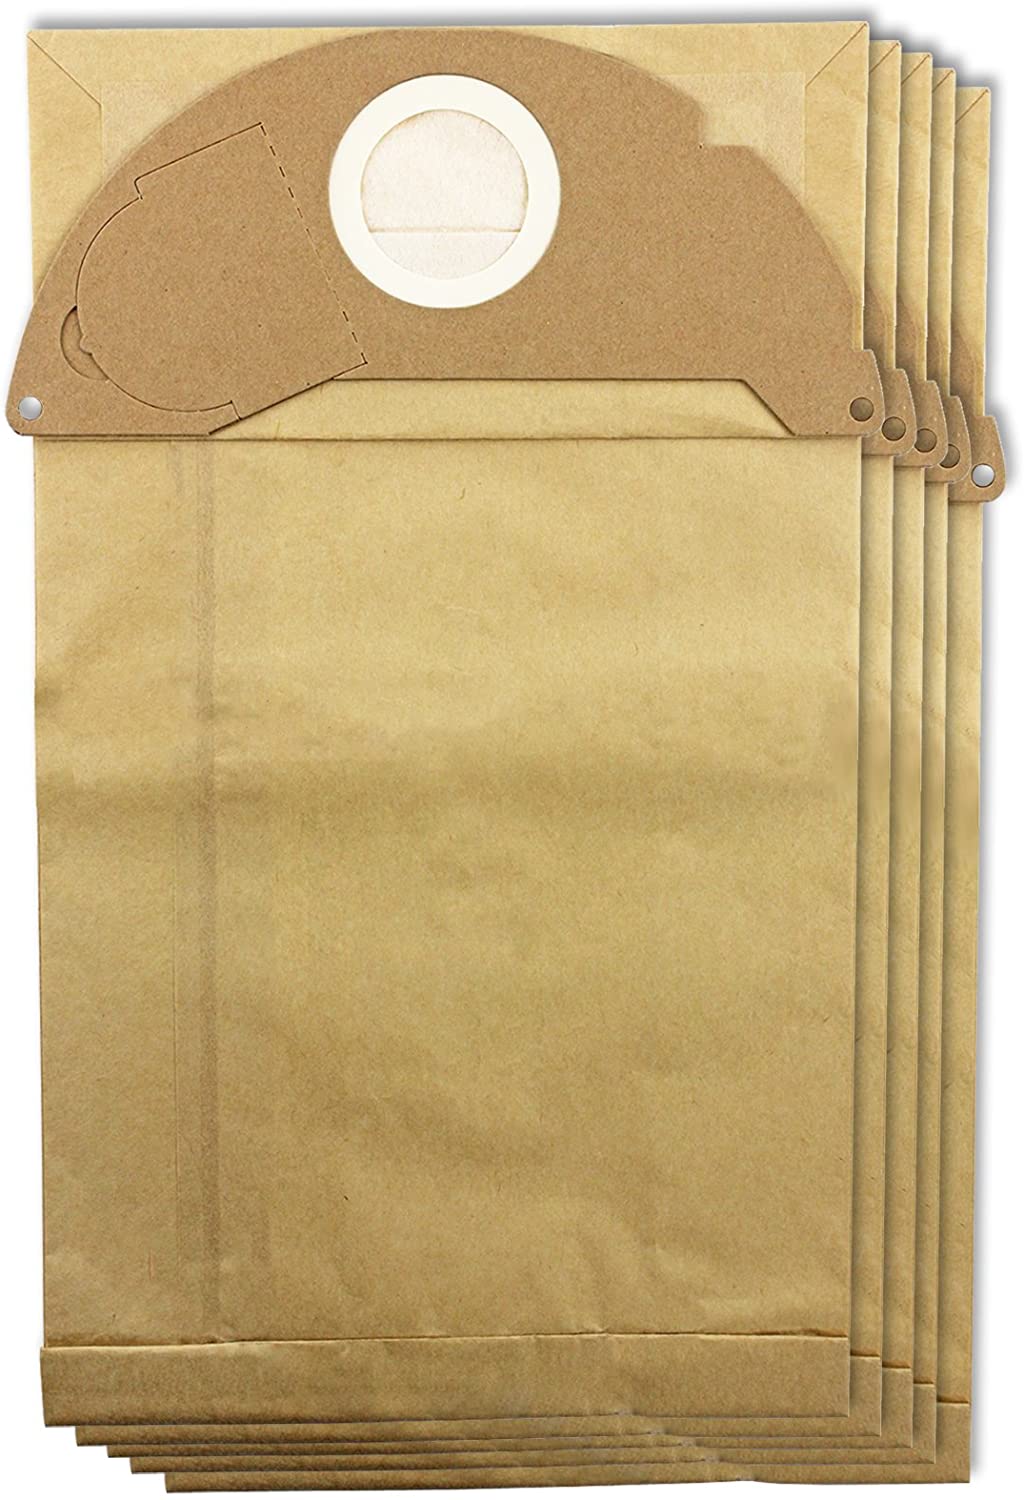 Strong Dust Bags for Karcher WD2200 WD2240 Vacuum Cleaners (Pack of 5)